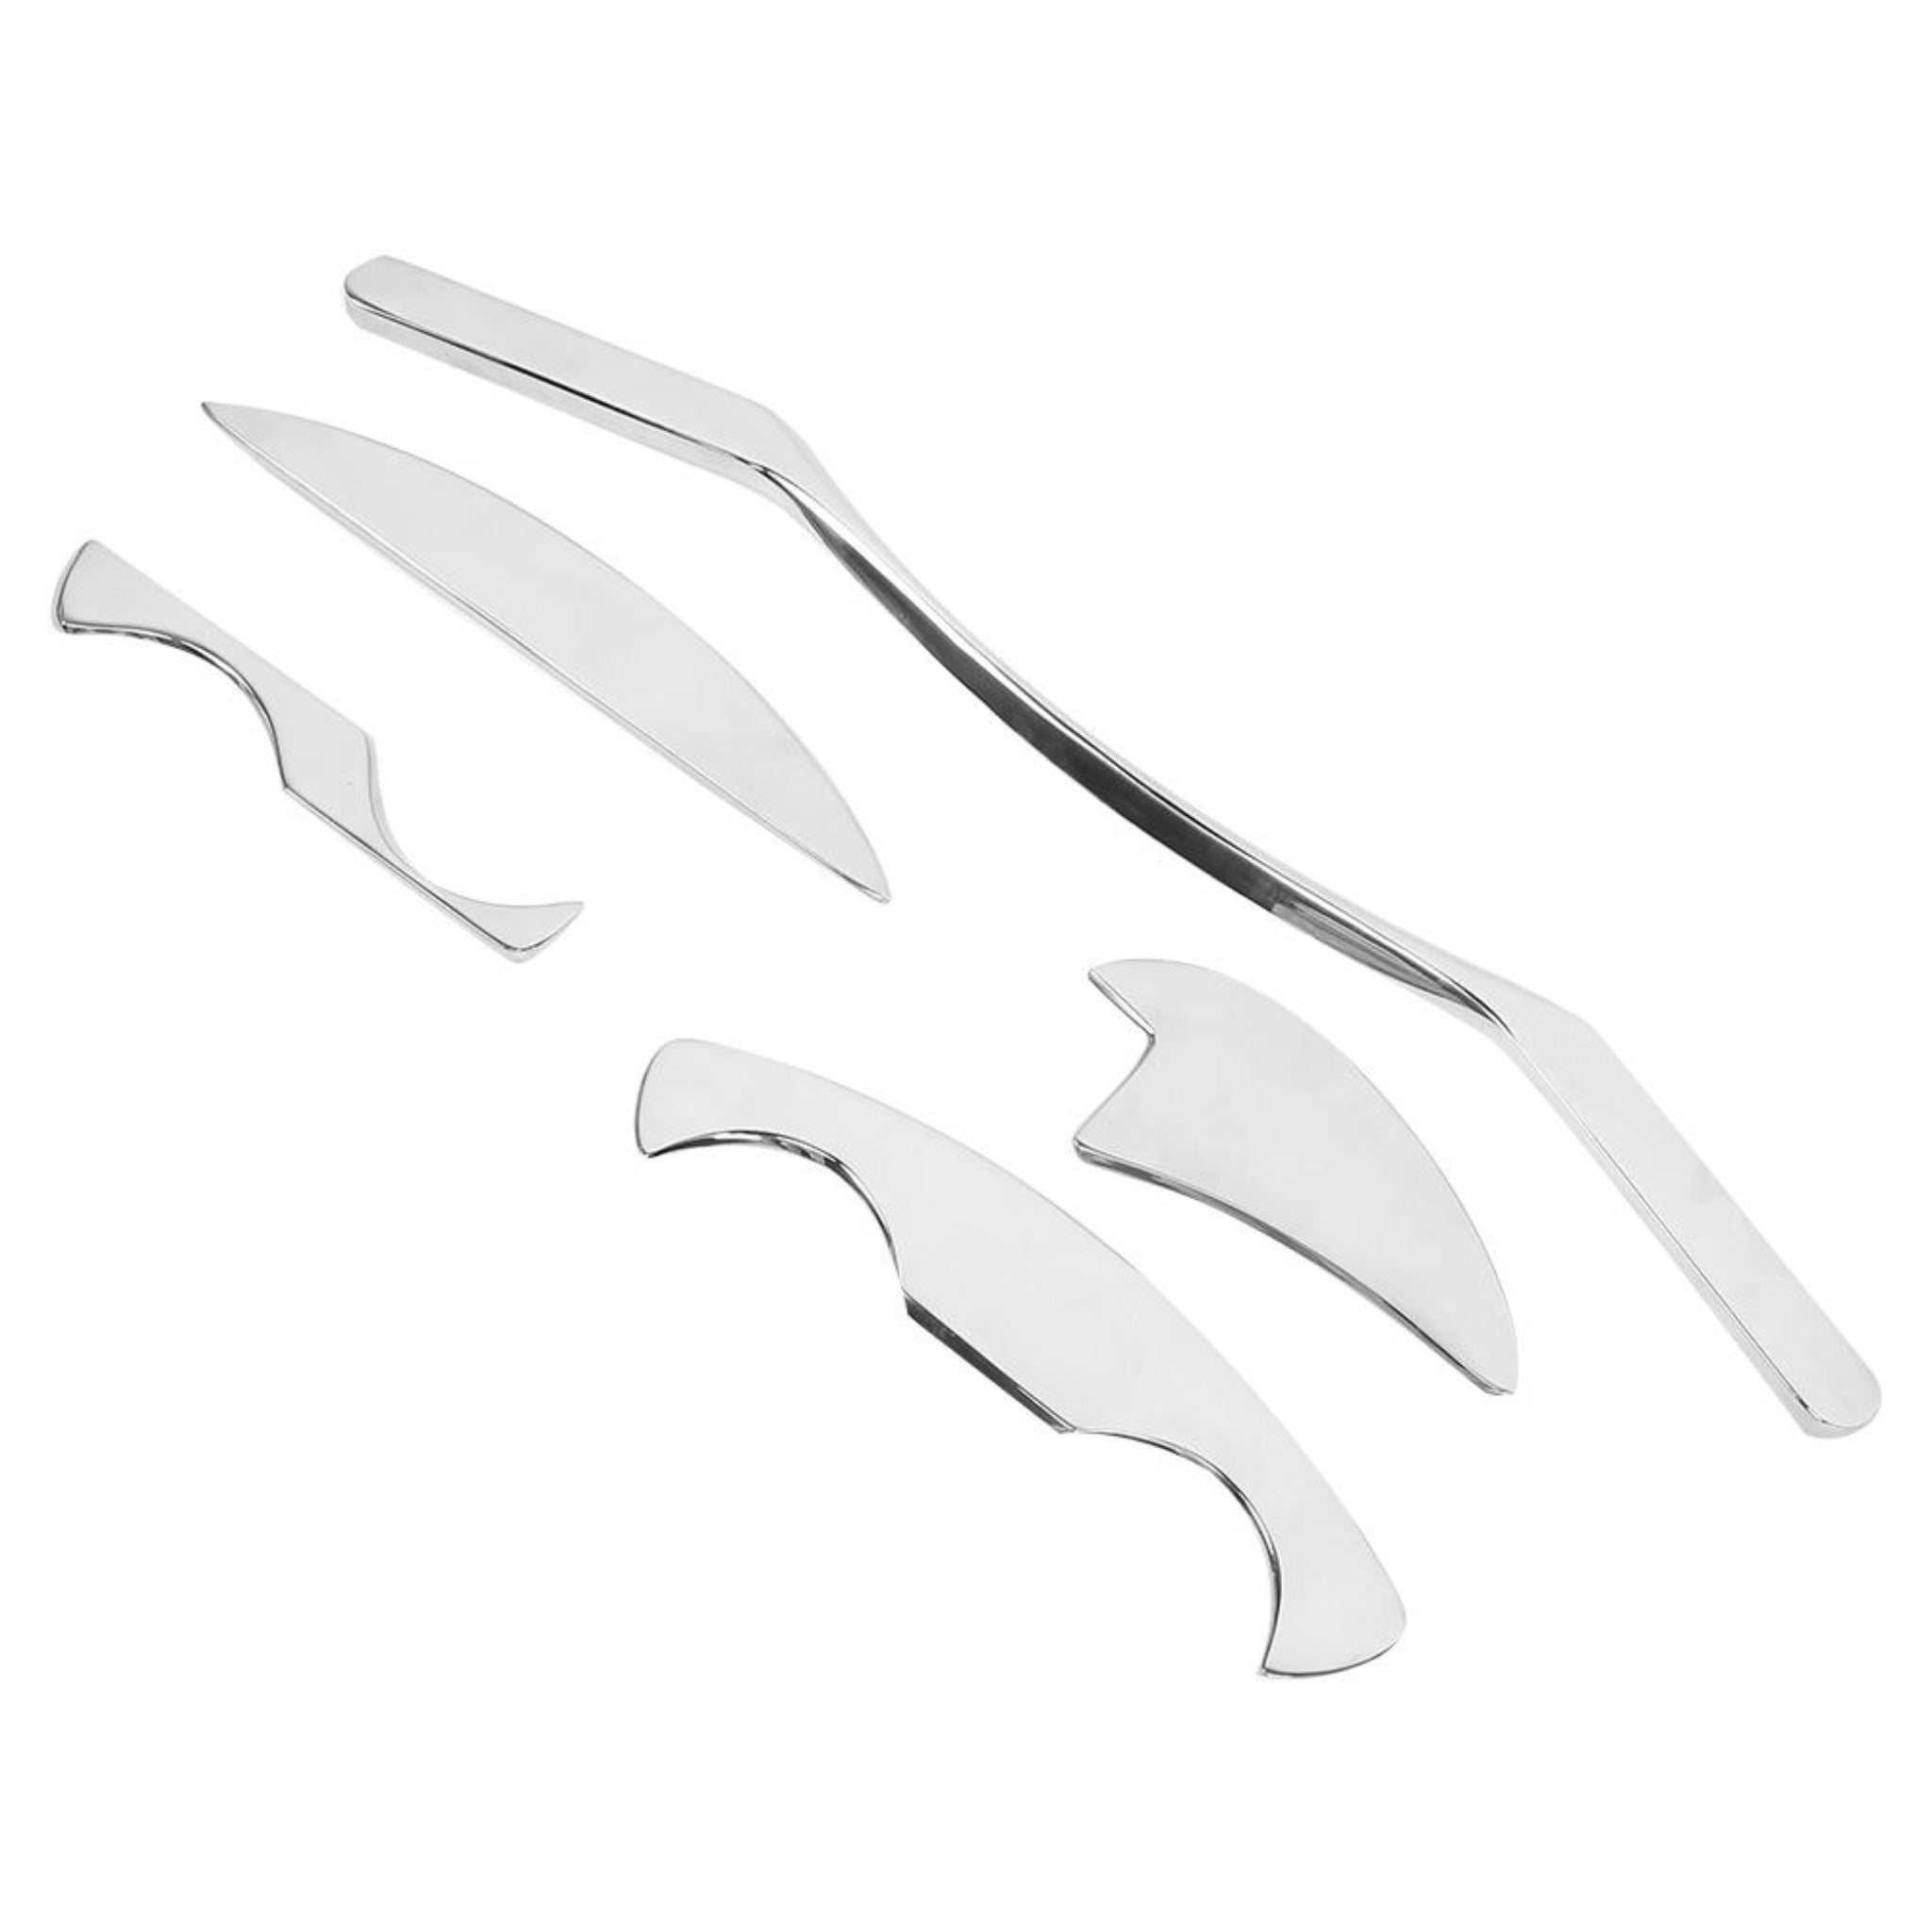 IASTM Stainless Steel Set Practitioner Tools